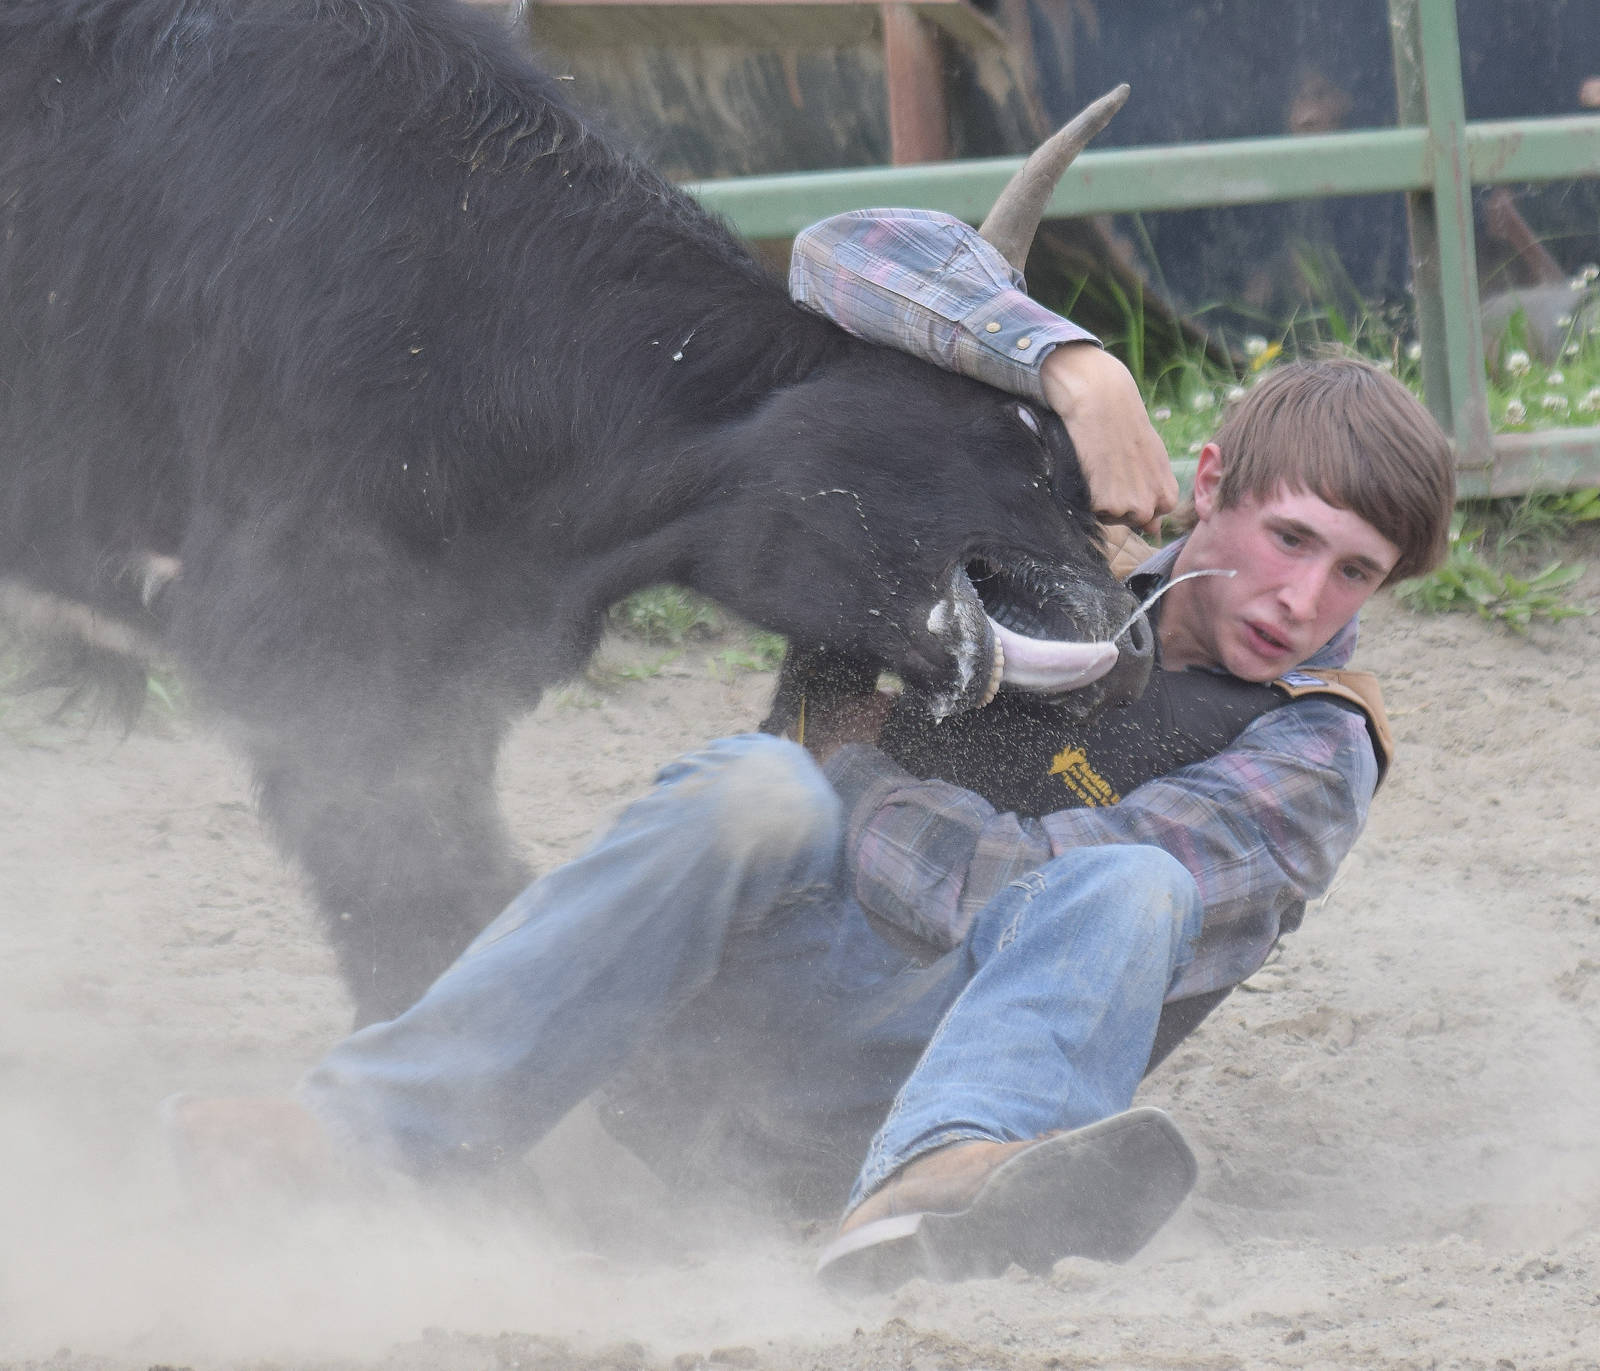 Austin Strattman wrestles a steer to the ground in a chute dogging display June 25, 2016, at the Soldotna rodeo grounds. (Photo by Joey Klecka/Peninsula Clarion)